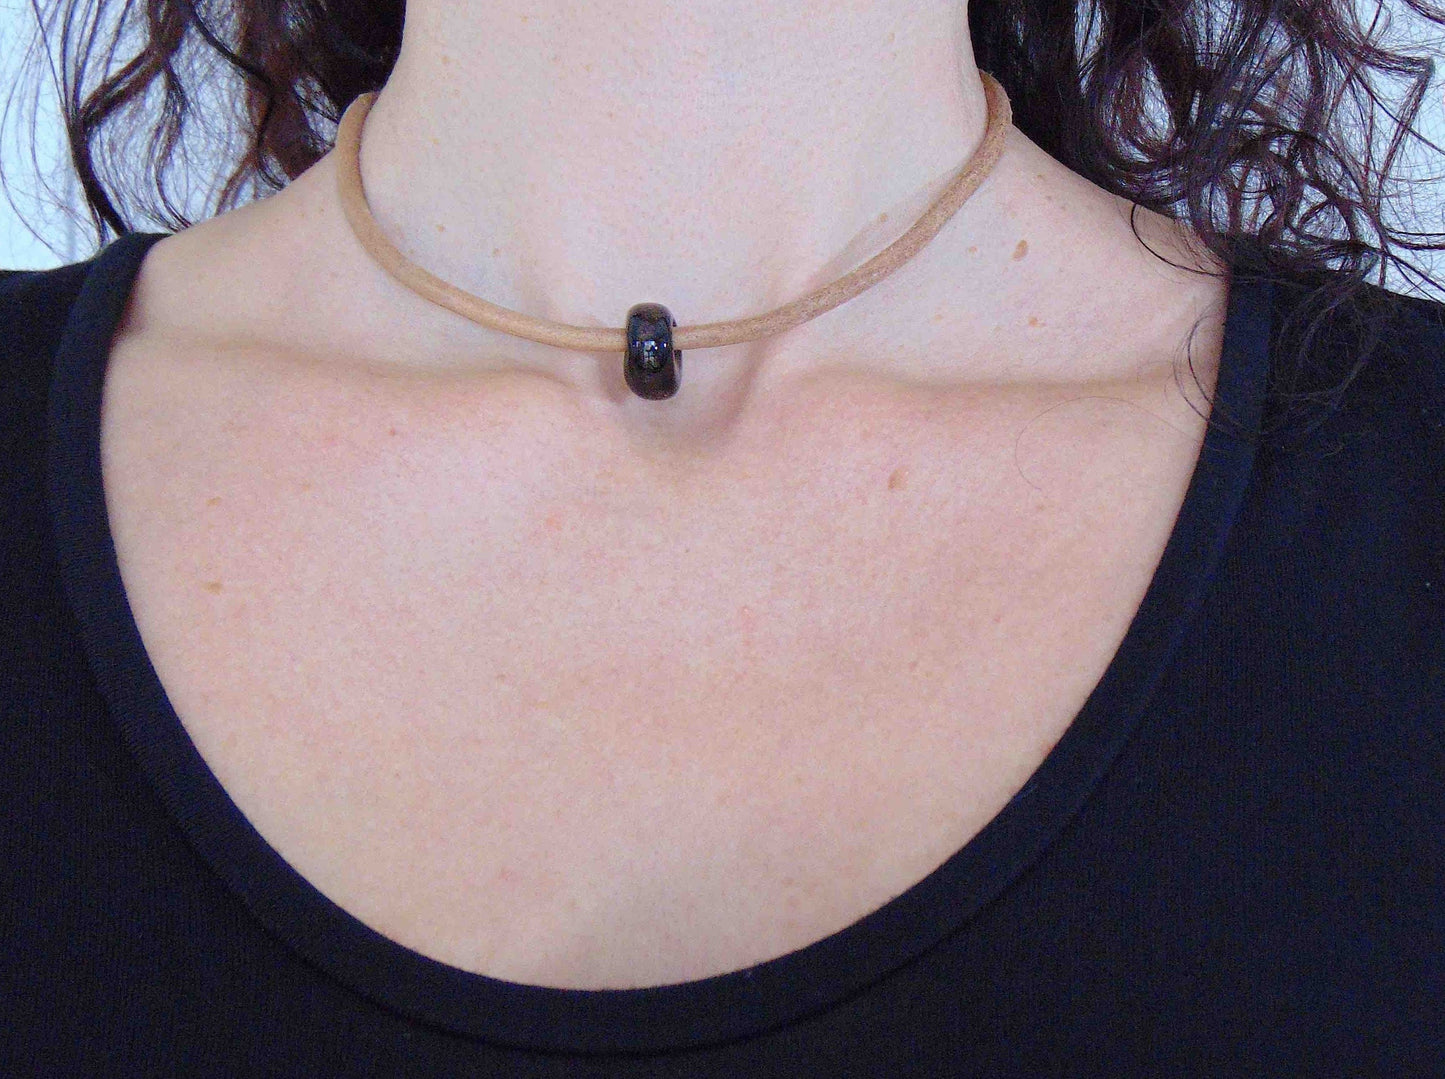 Choker necklace with black glass bead (Murano-style glass handmade in Montreal), bronze aventurine inclusions, rough natural leather cord, stainless steel clasp